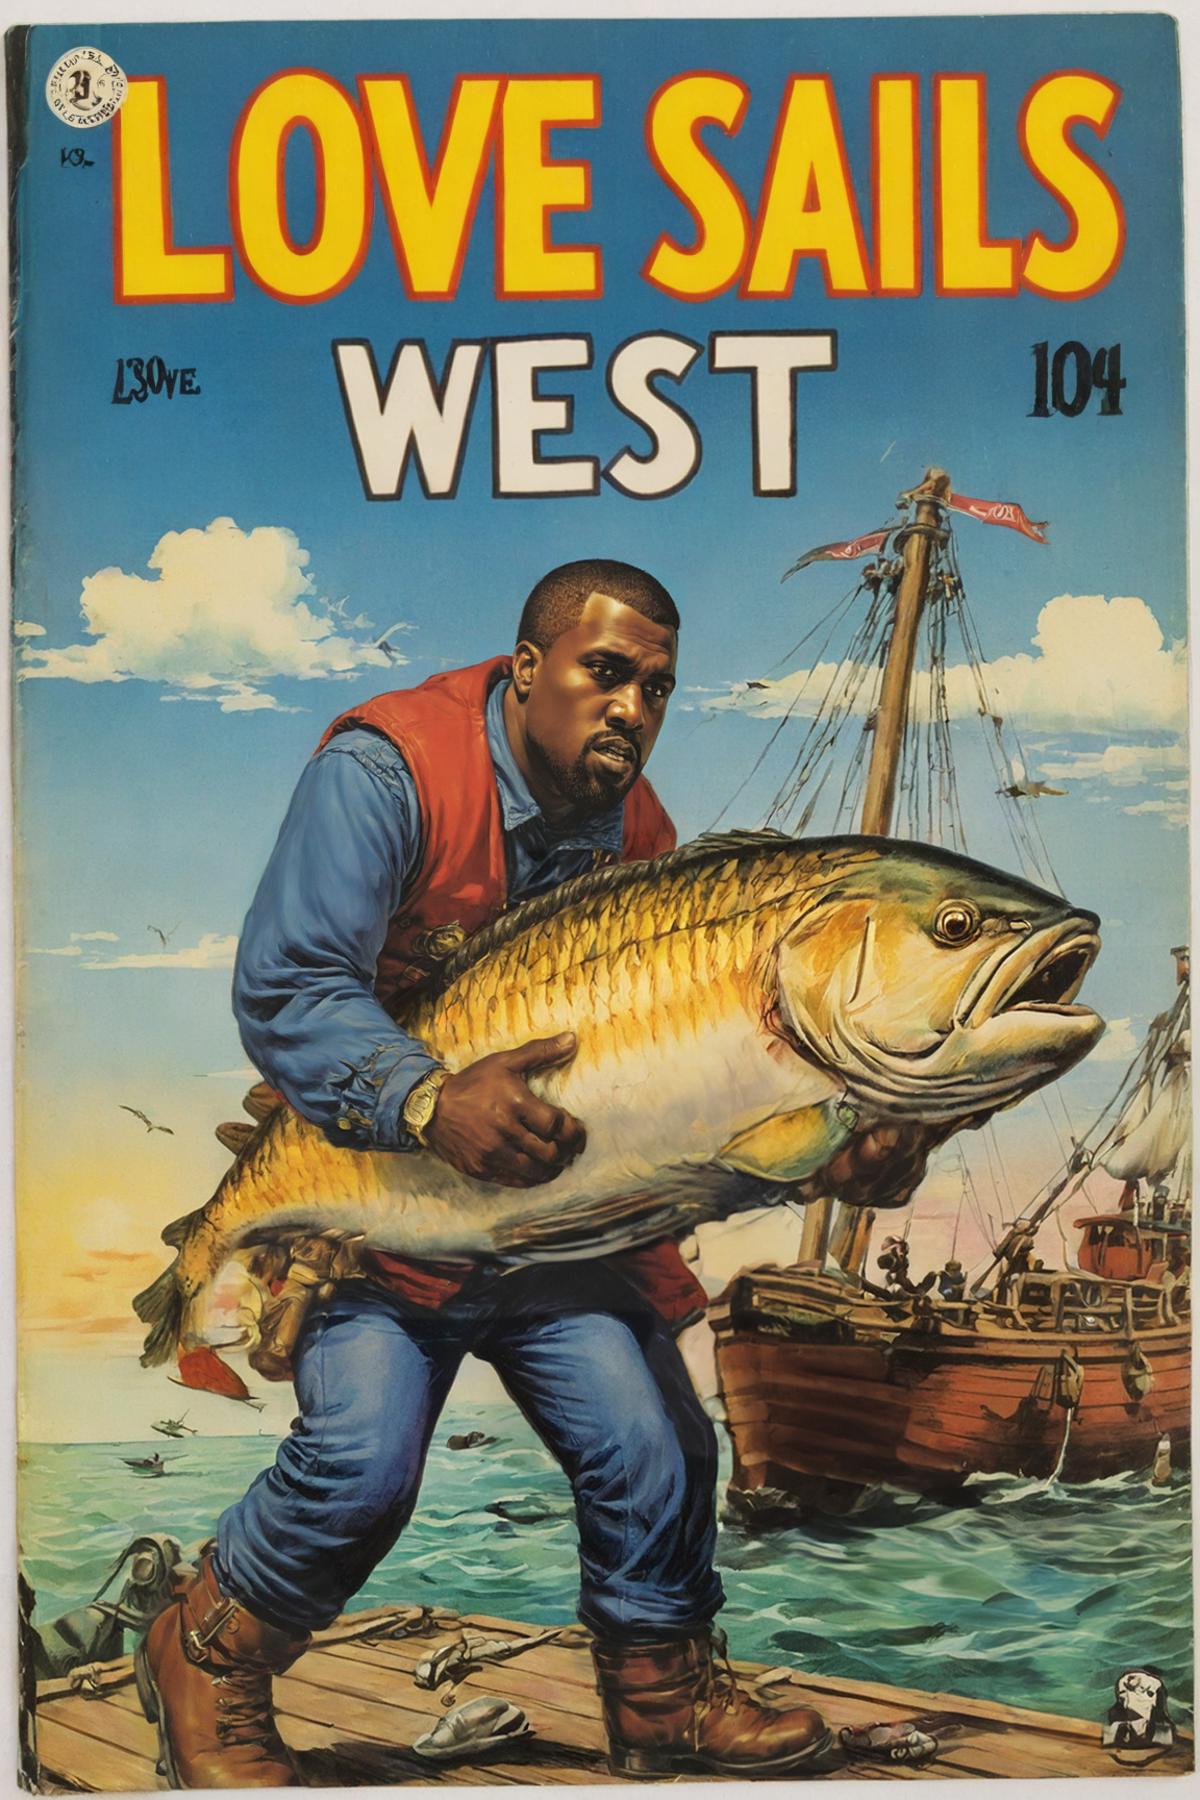 A man holding a huge fish in the ocean, depicted on a magazine cover.